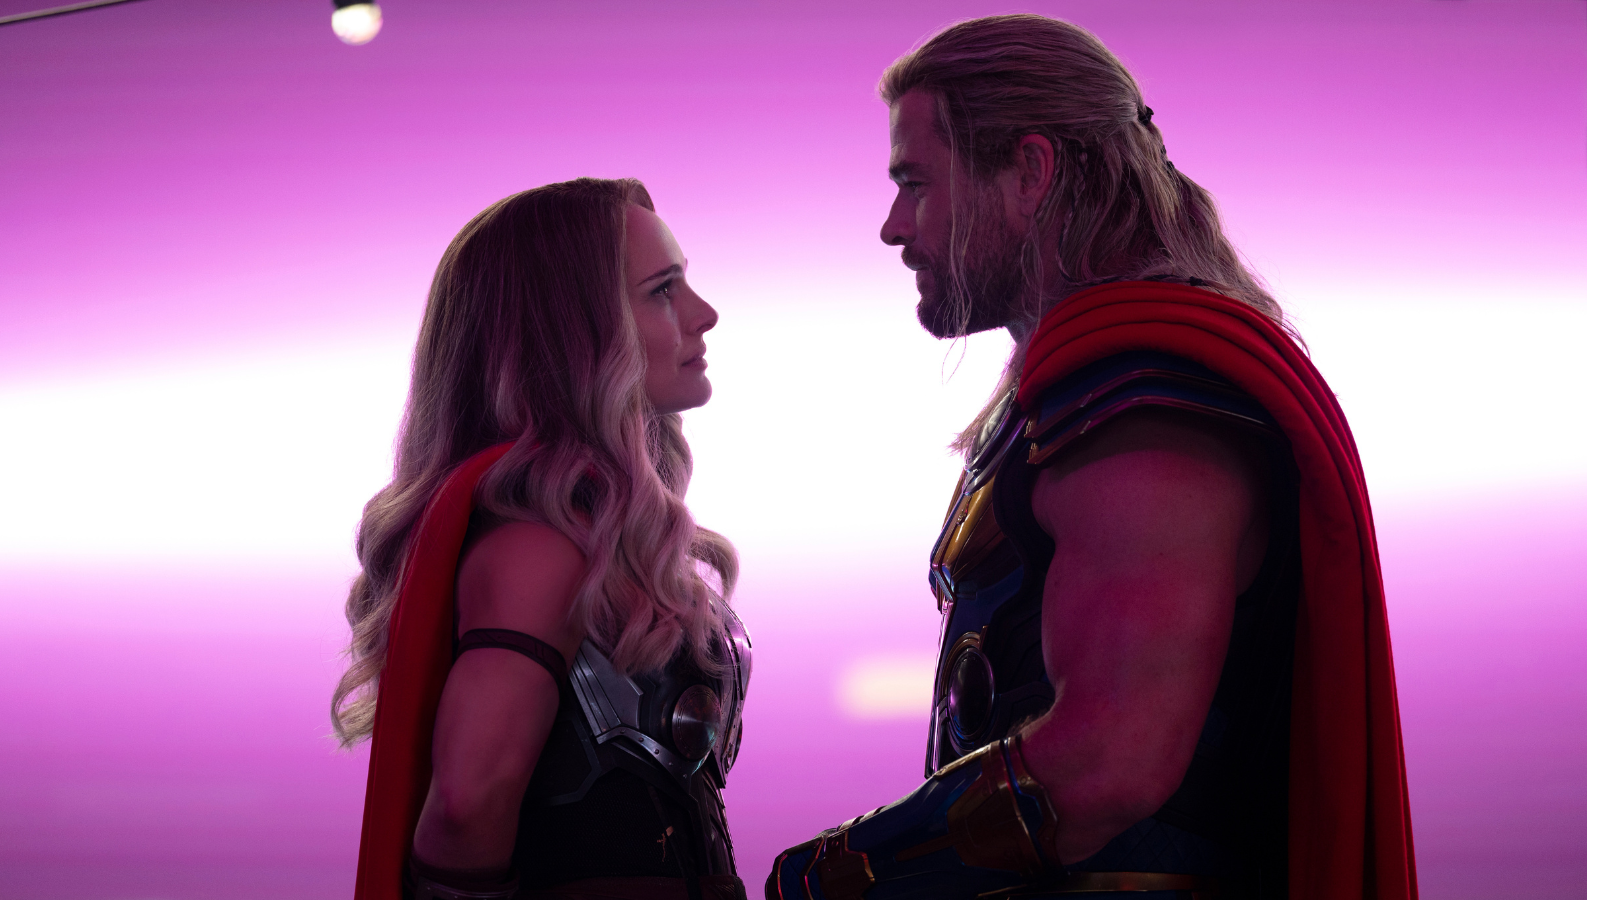 Natalie Portman as Mighty Thor and Chris Hemsworth as Thor face each other in a romantic silhouette from ‘Thor: Love and Thunder’